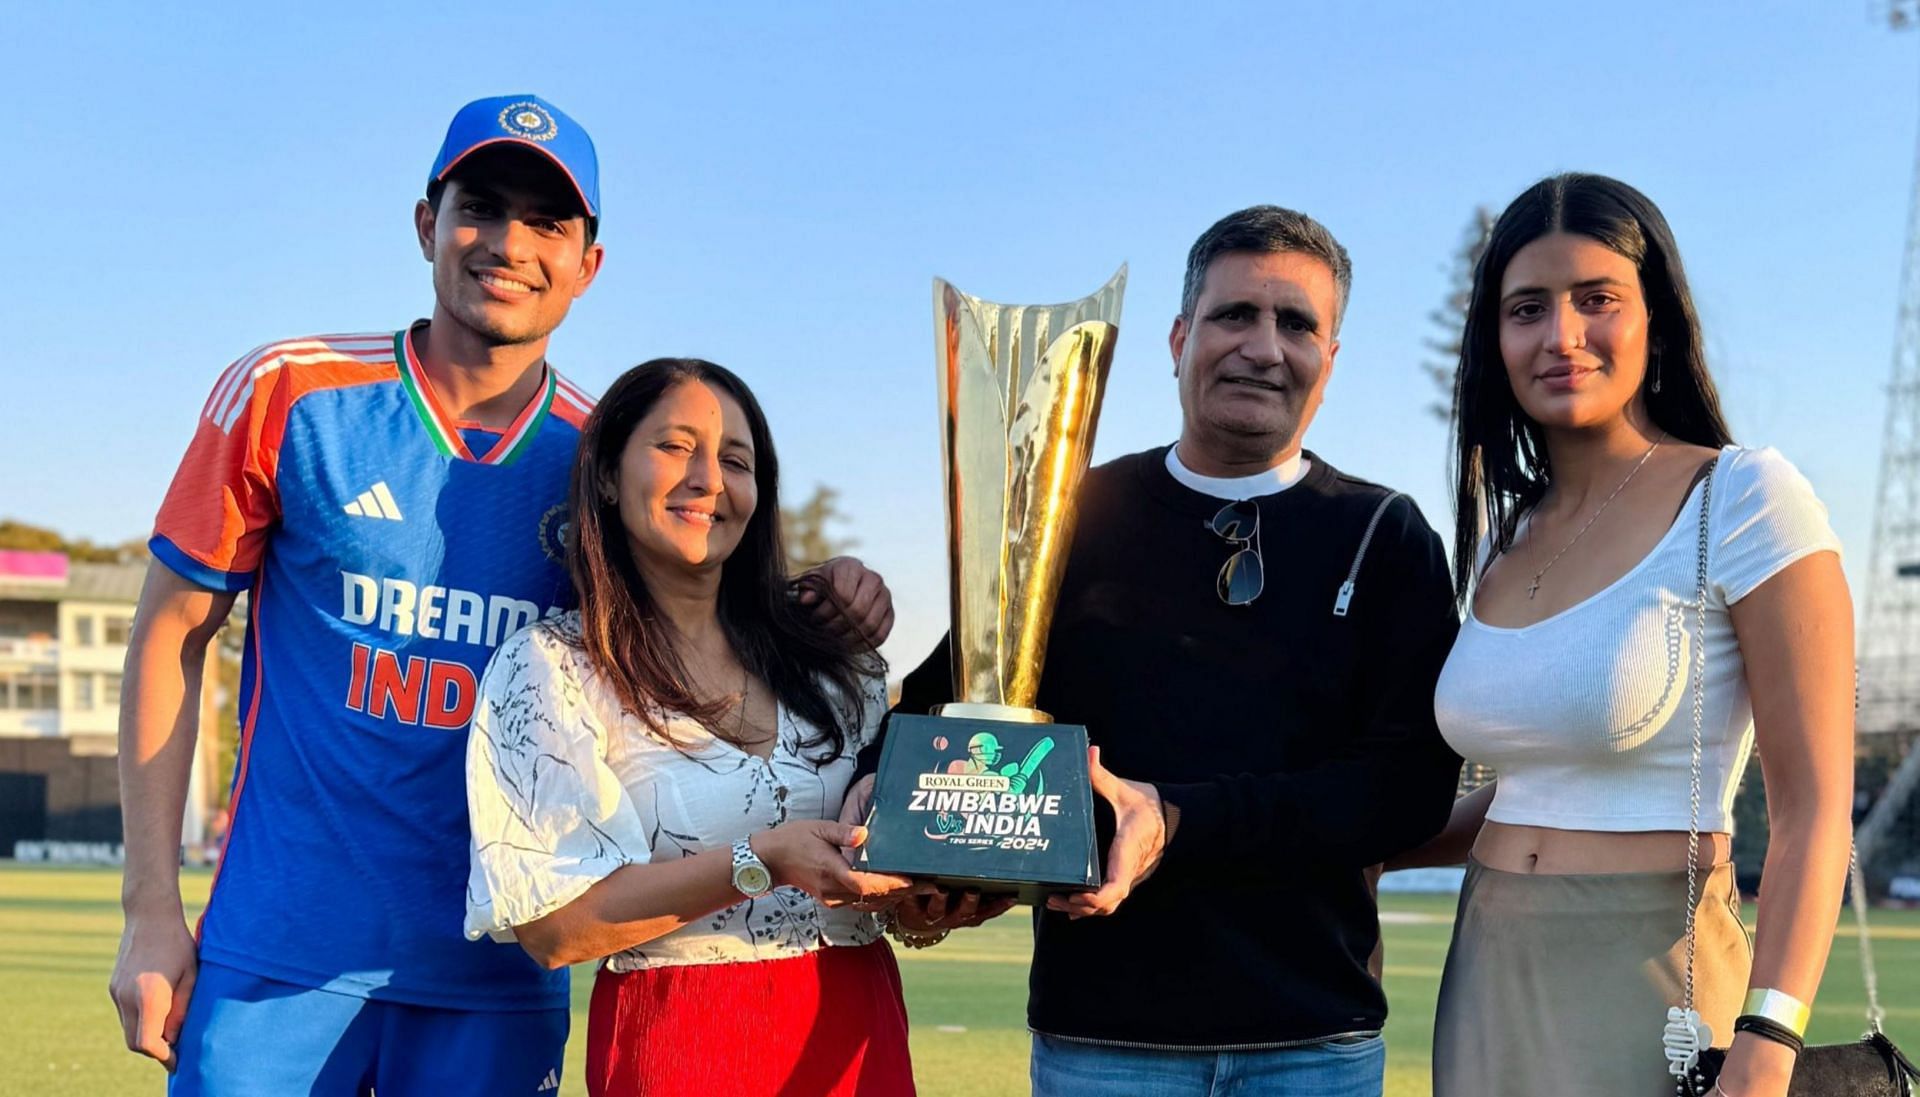 [Watch] Shubman Gill celebrates with his family after his first series win as captain vs Zimbabwe